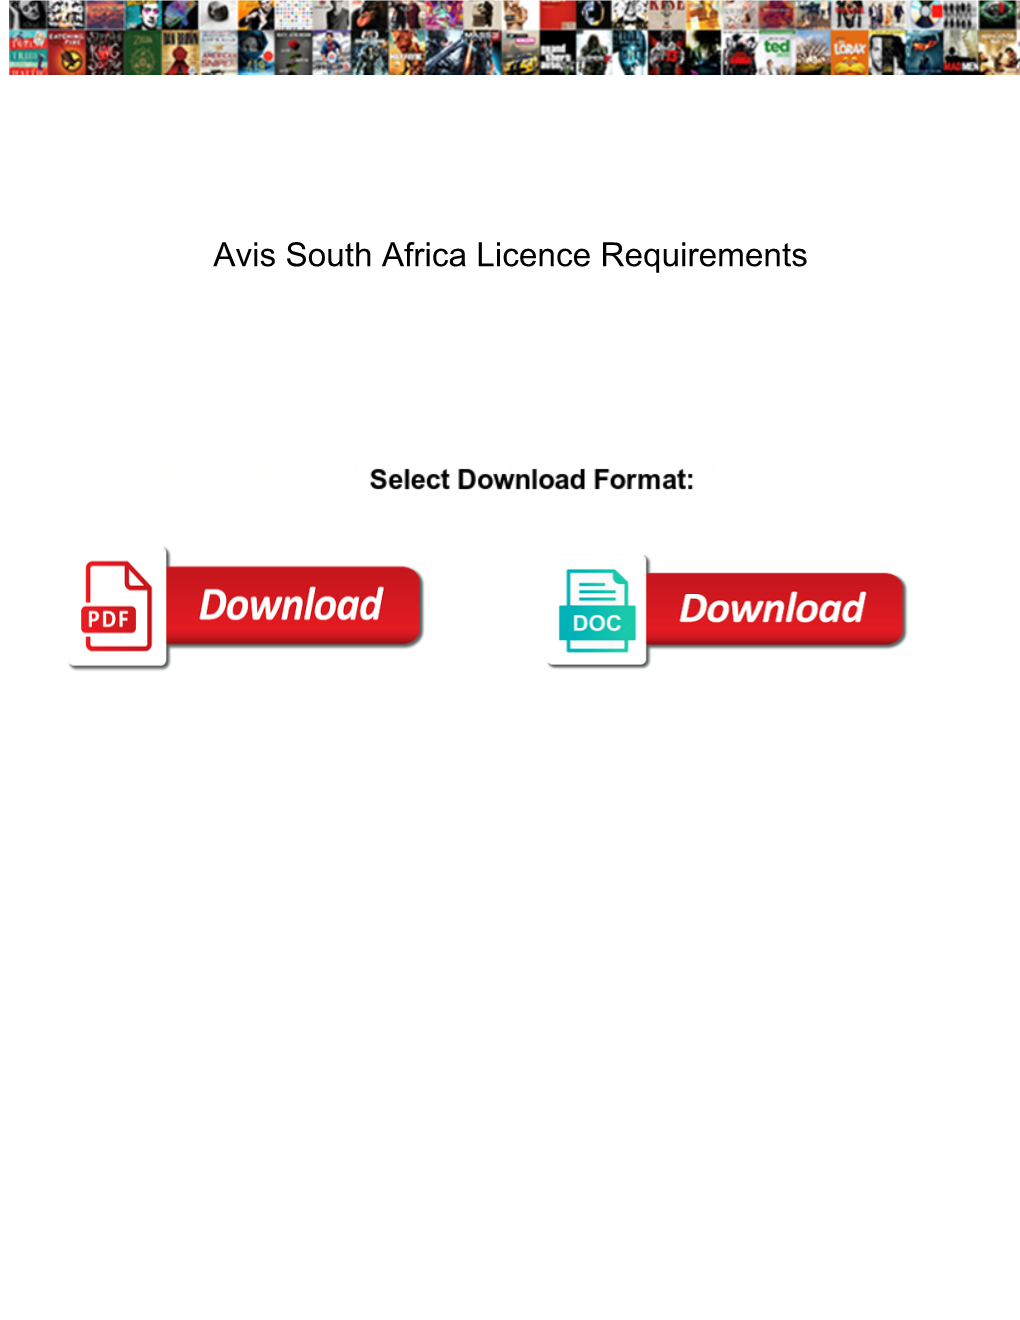 Avis South Africa Licence Requirements